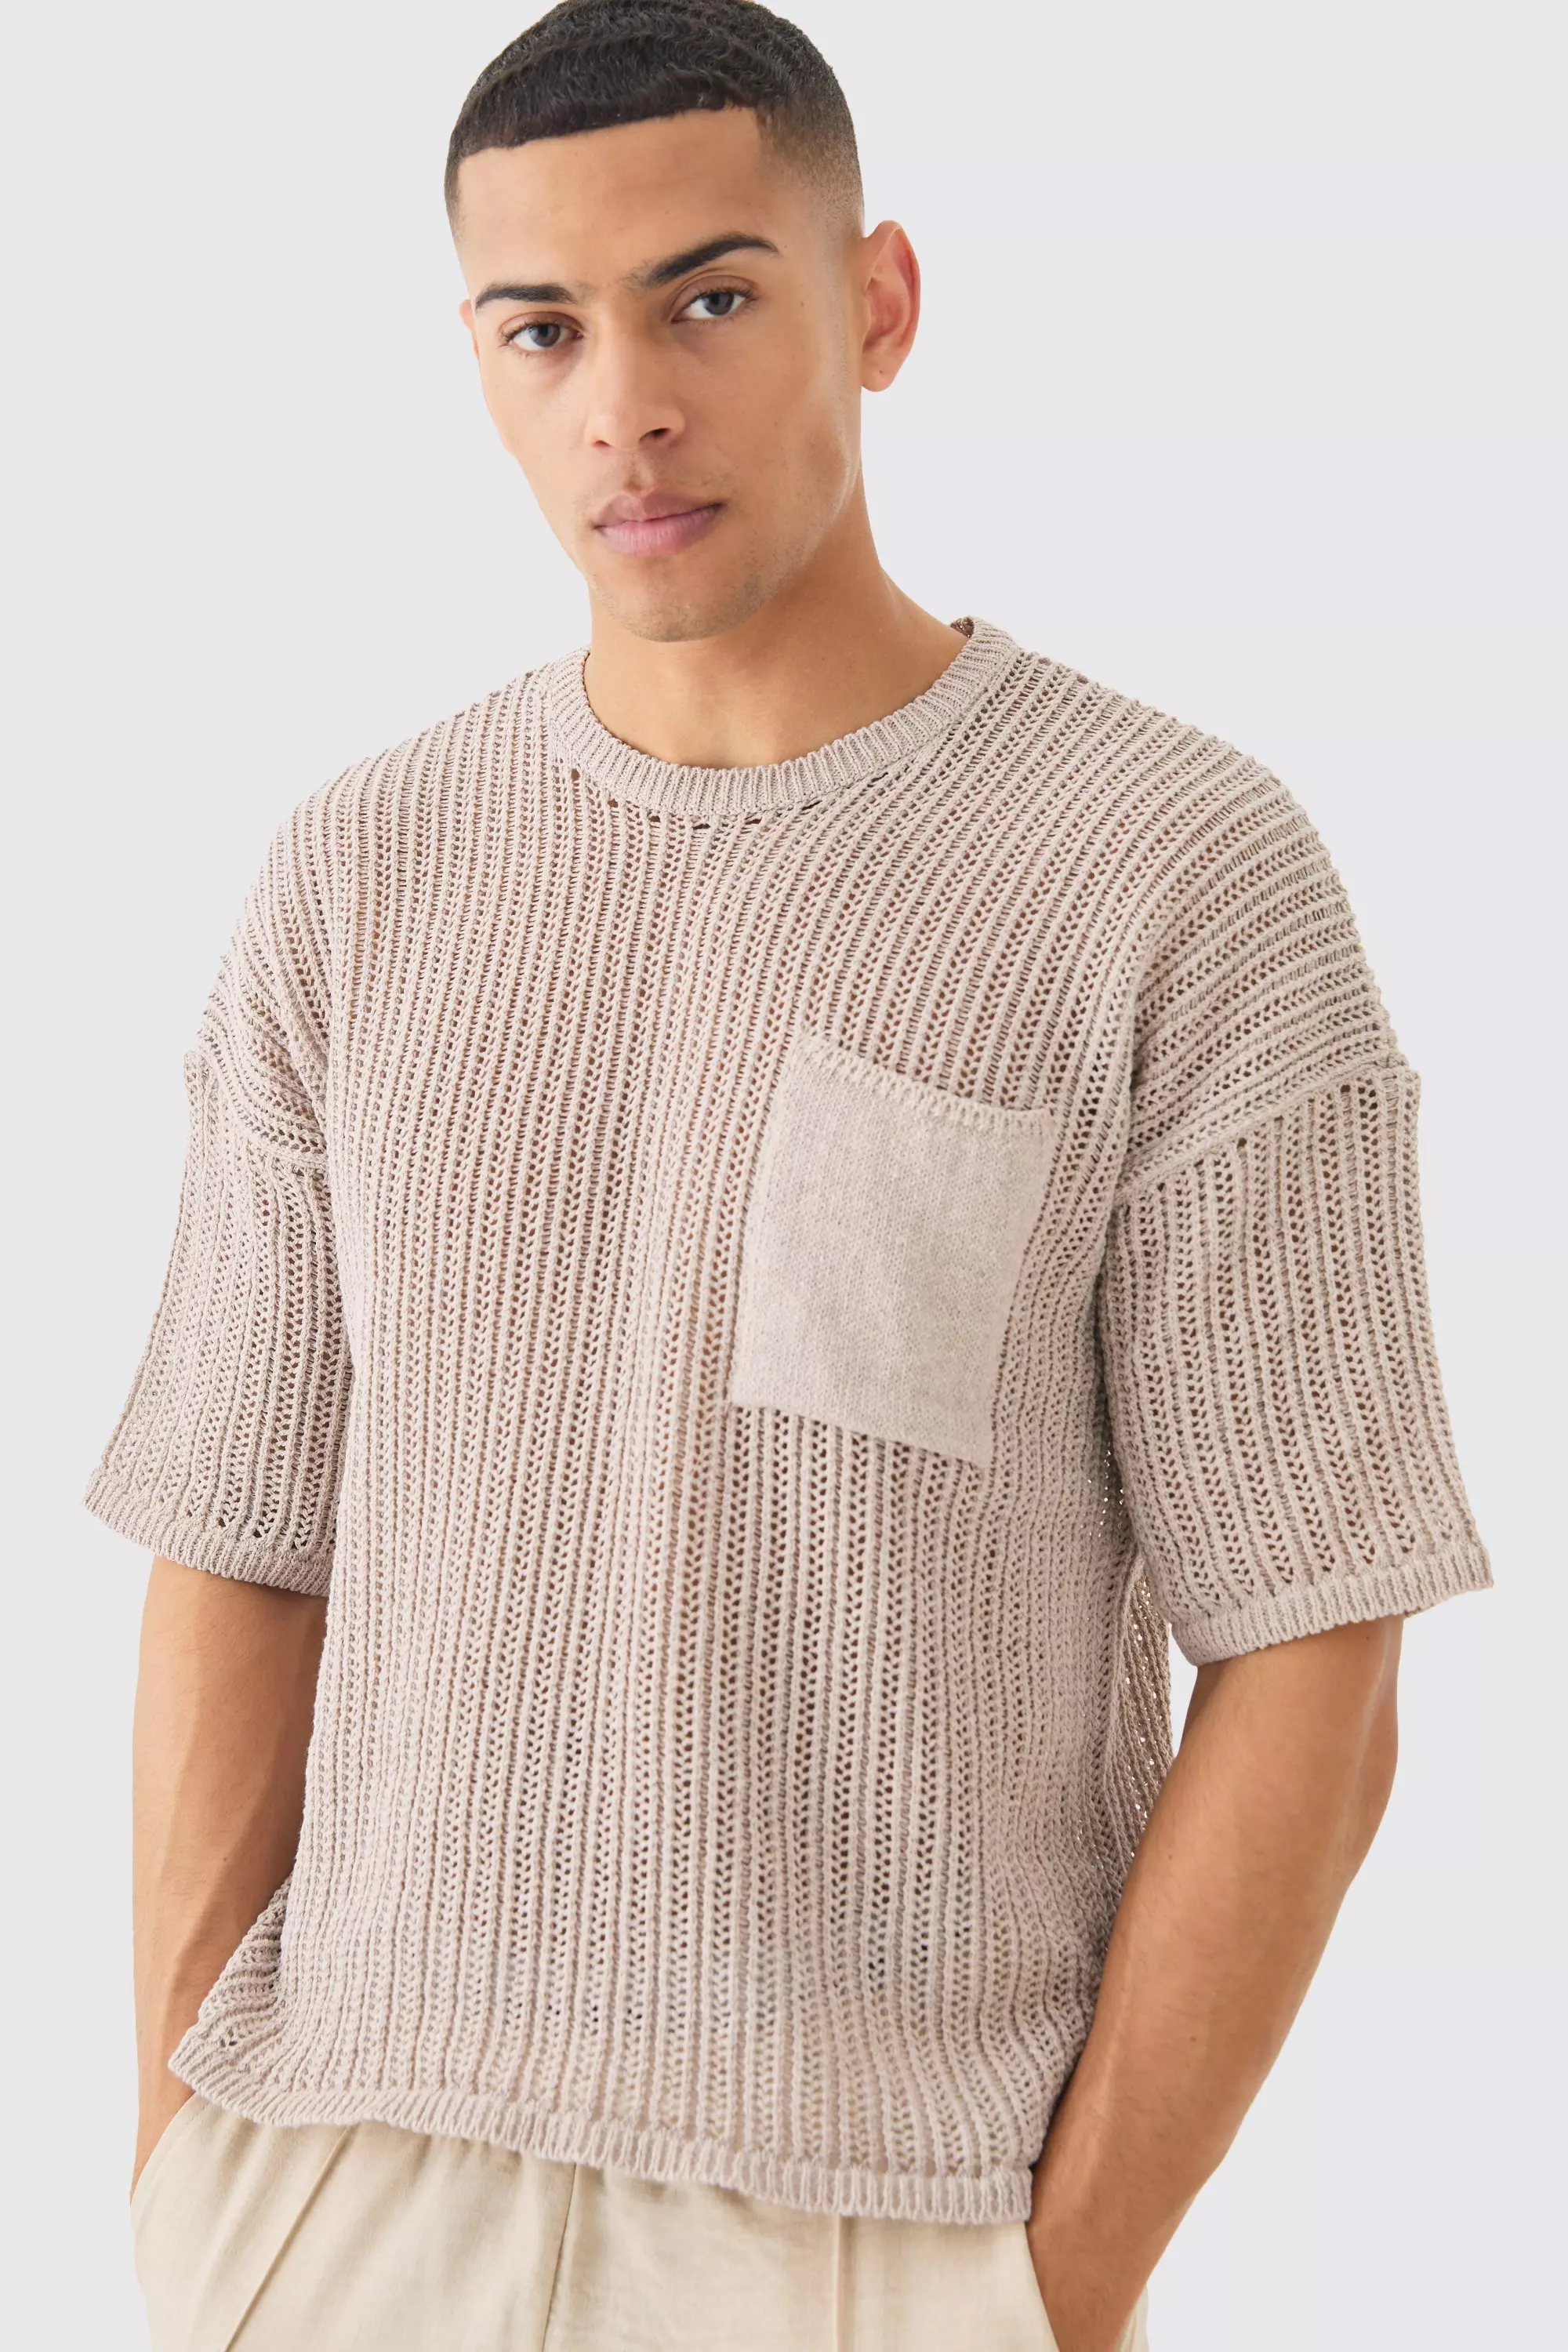 Beige Oversized Open Stitch T-shirt With Pocket In Stone